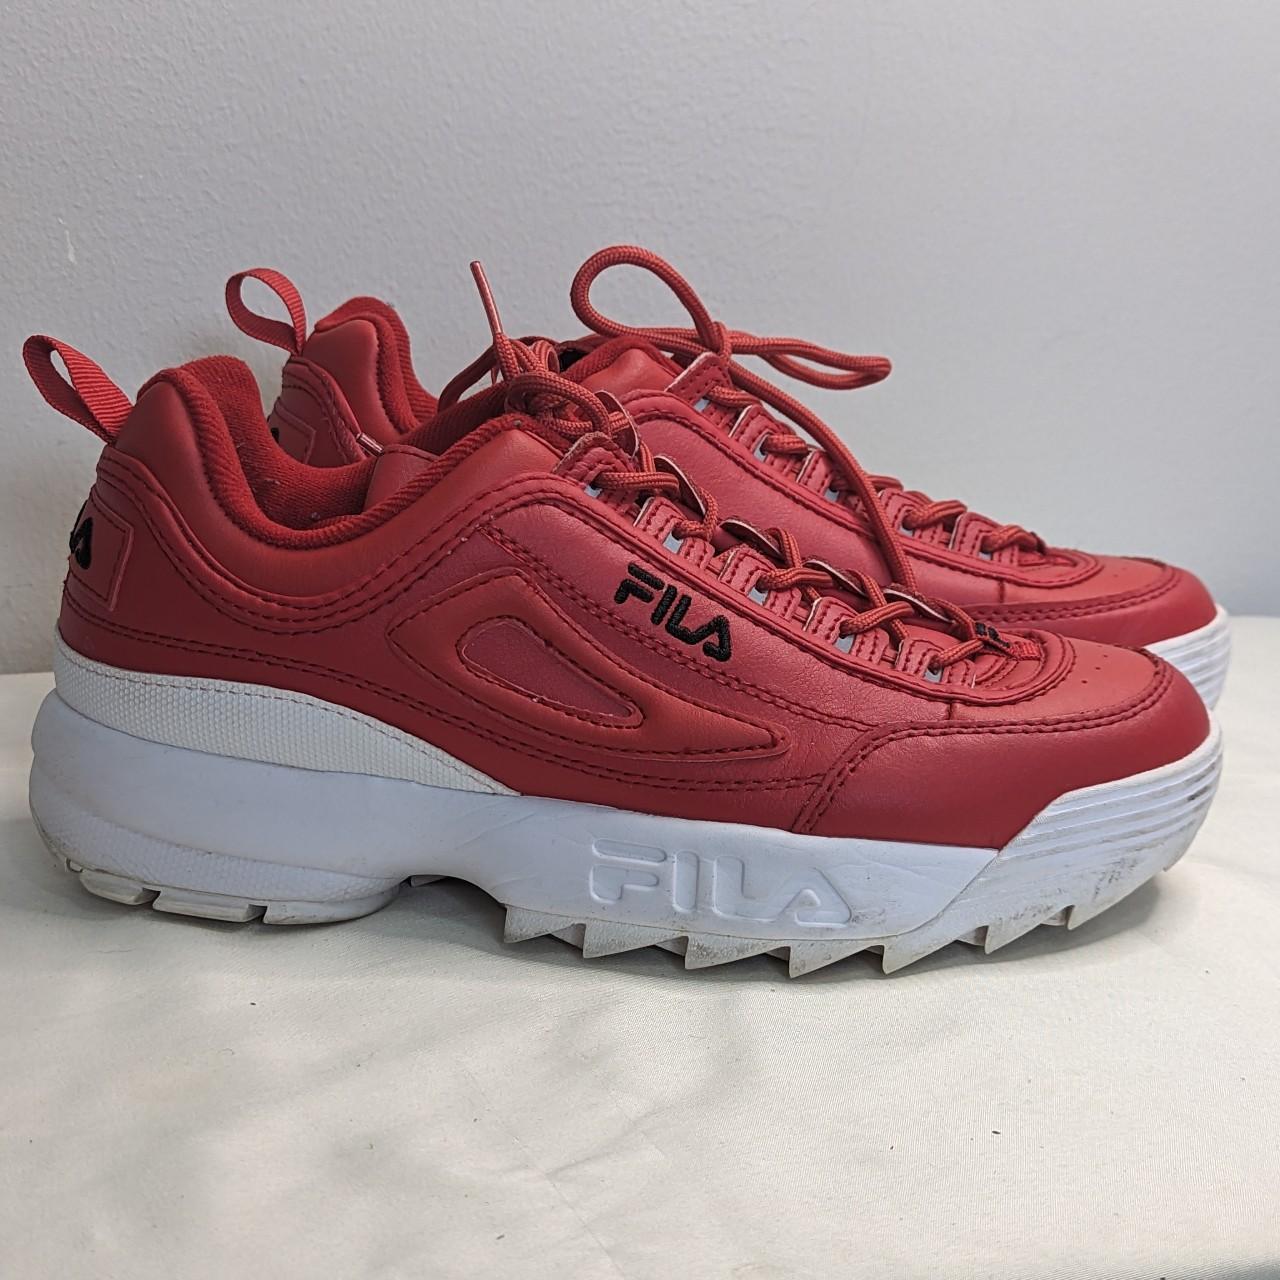 Disruptor chunky sneakers. Size 10. Red and... Depop